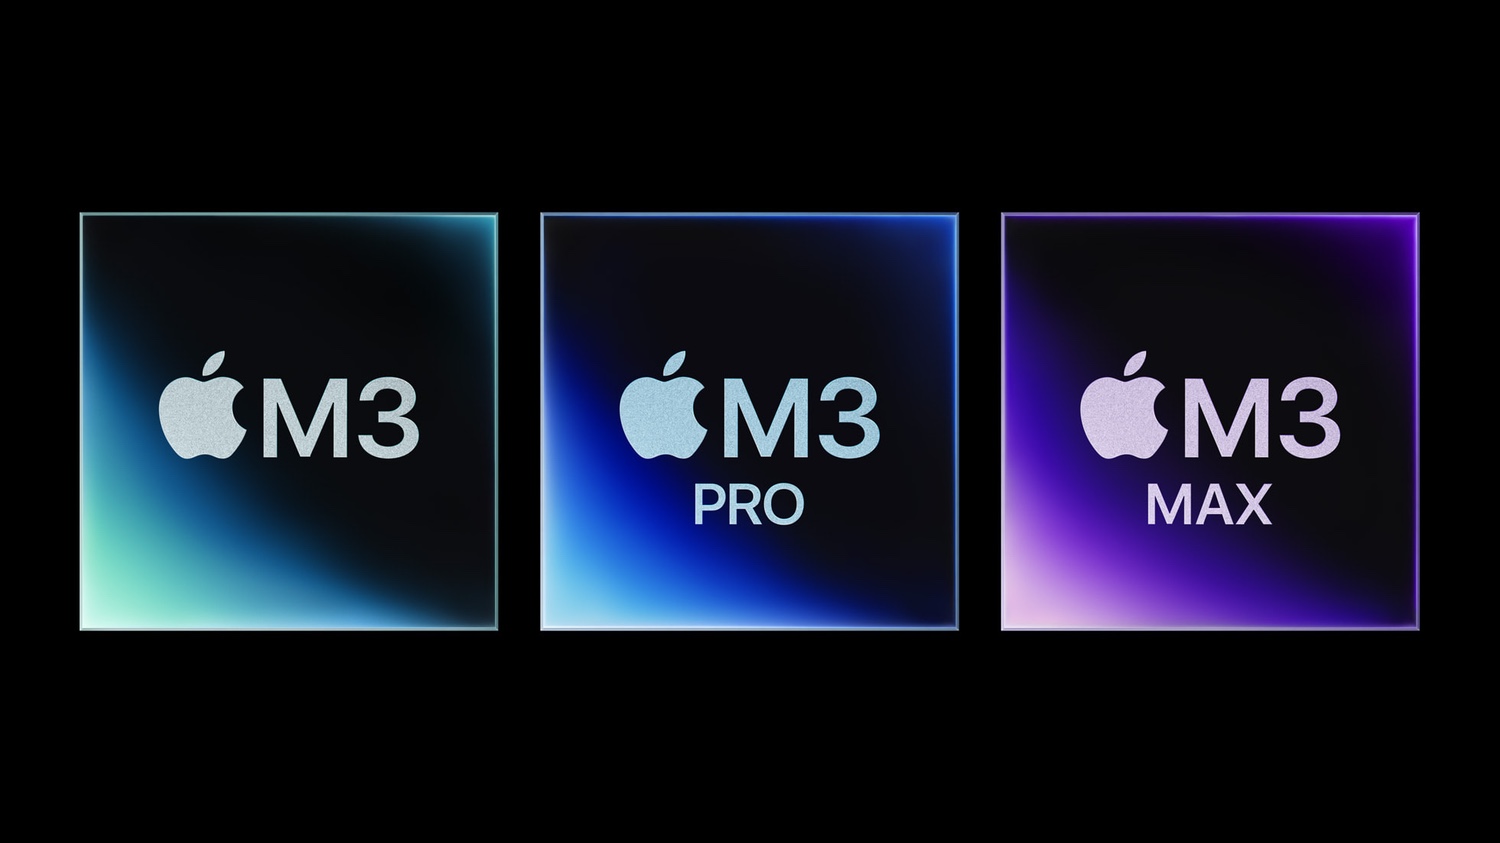 How to choose the best processor for your Mac